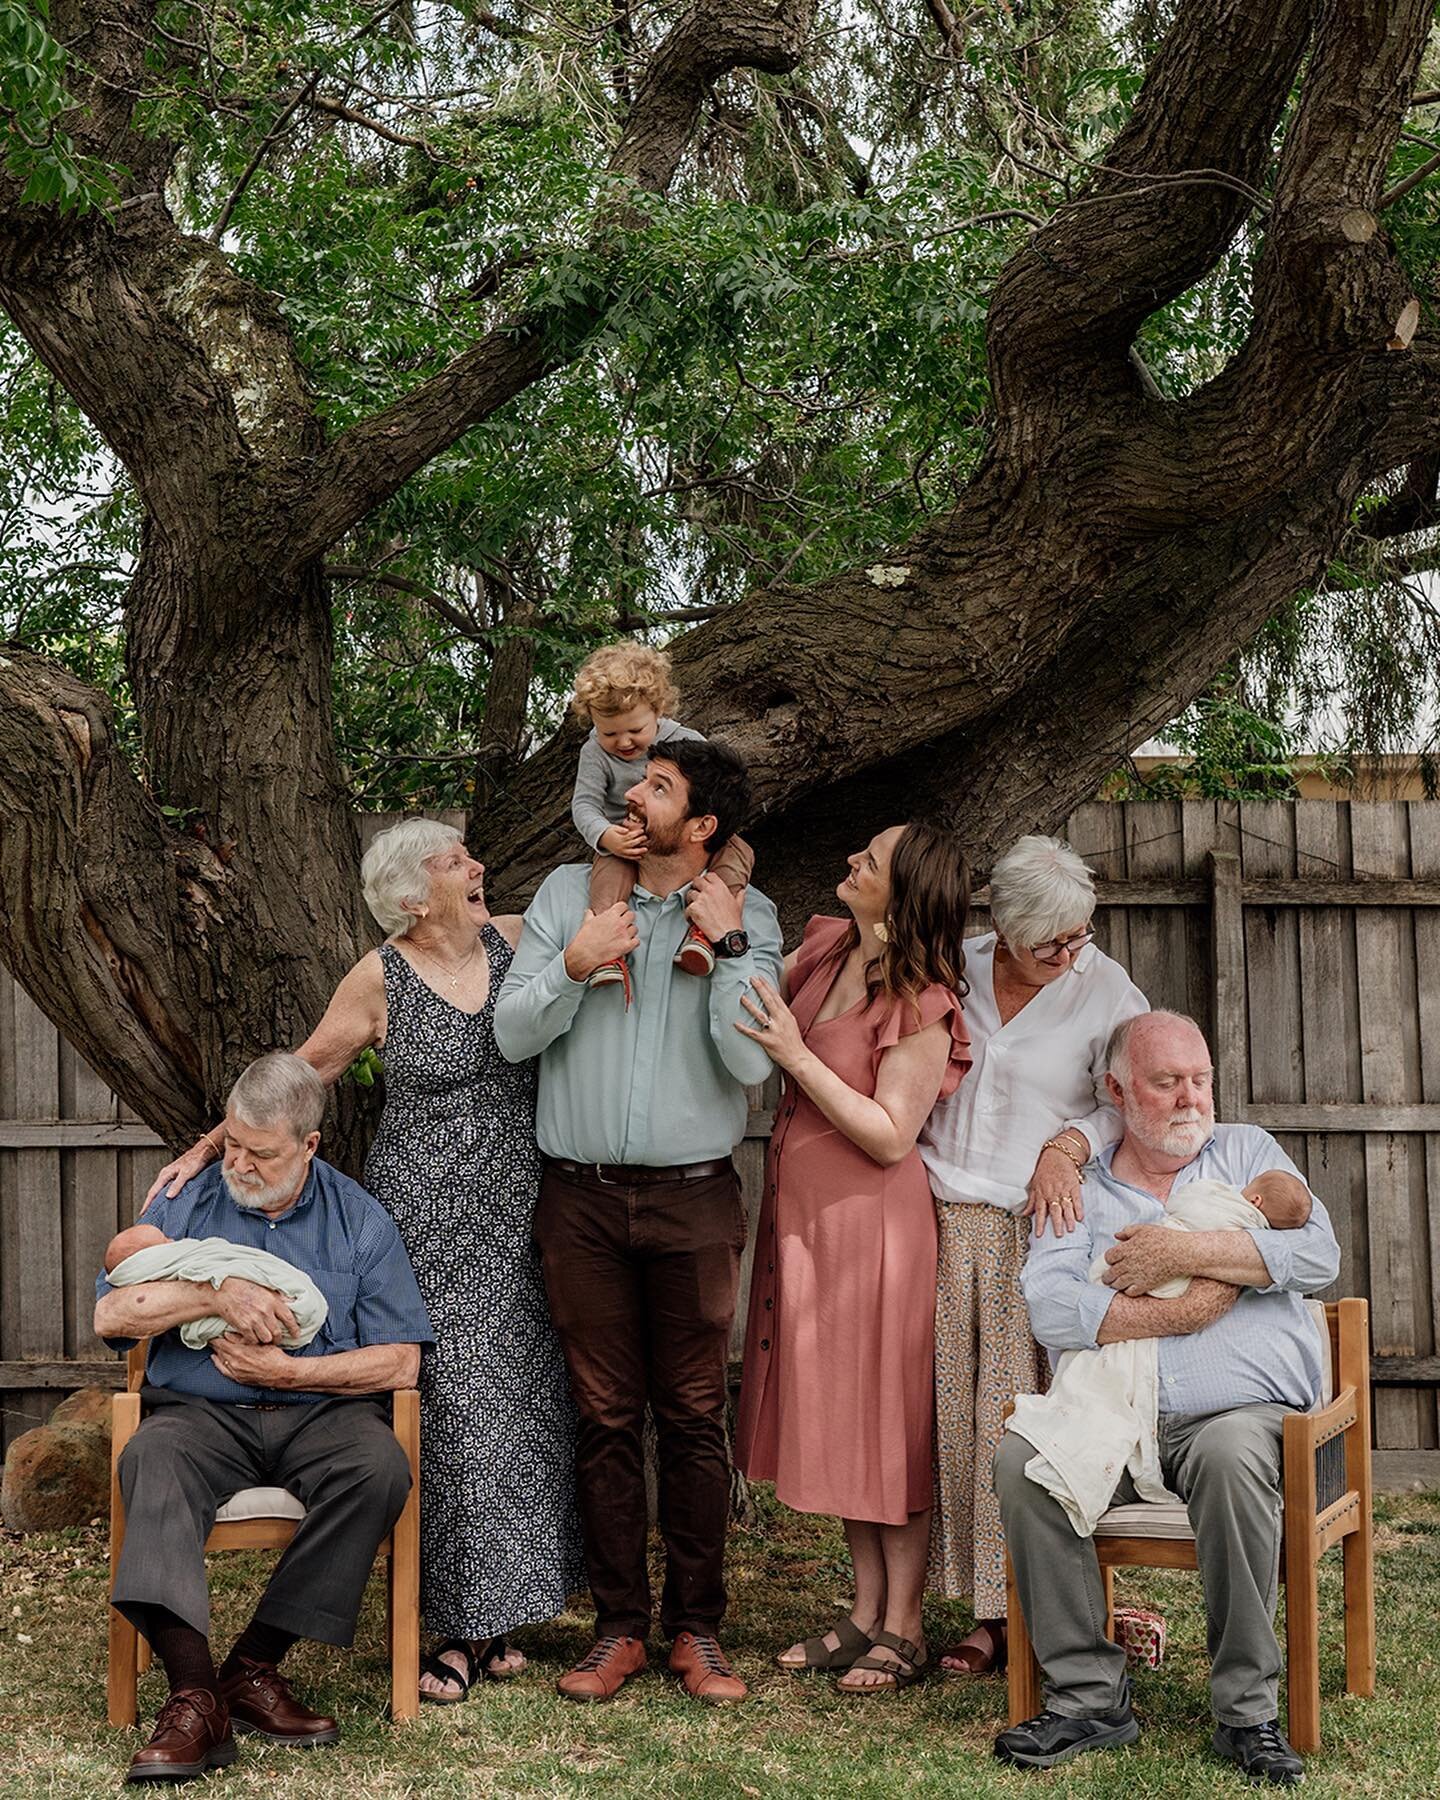 🍃
&lsquo;Tides will rise and moons will fall,
I&rsquo;ll be beside you through it all.&rsquo;
- Jess Racklyeft

A beautiful extended family session to welcome newborn twin boys.

With grandparents visiting all the way from Canada, it was the perfect